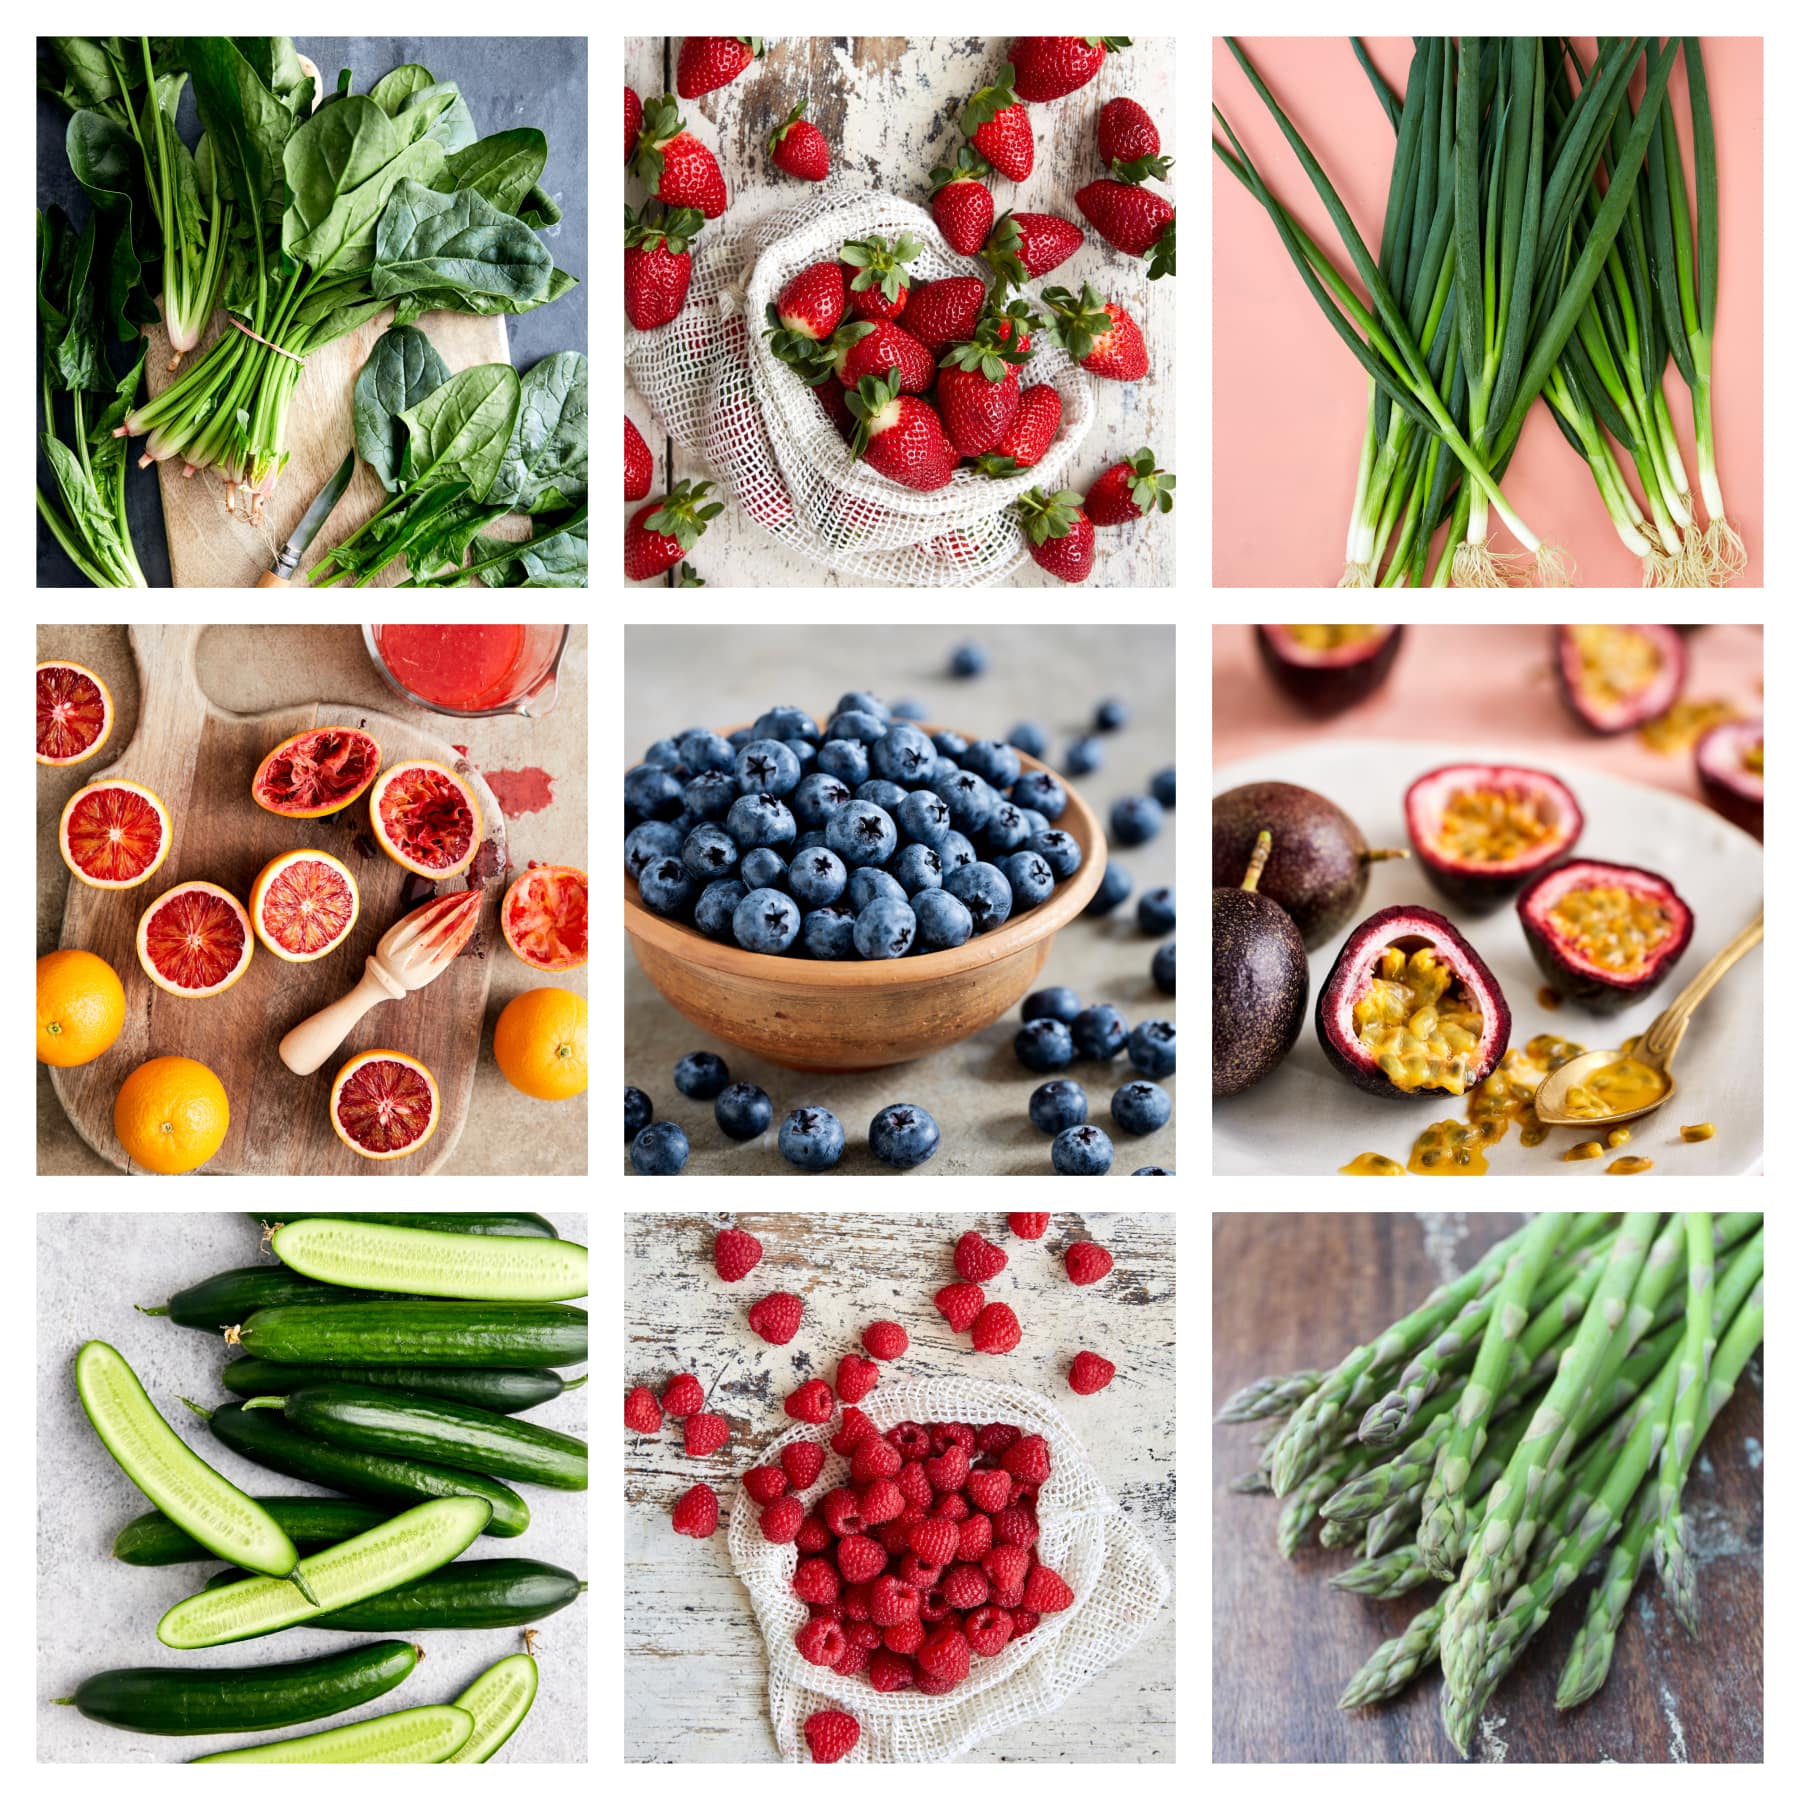 Dave's Market Update for the 30 August 2023 includes English Spinach, strawberries, shallots, blood oranges, blueberries, passionfruit, Lebanese cucumbers, raspberries, and asparagus.